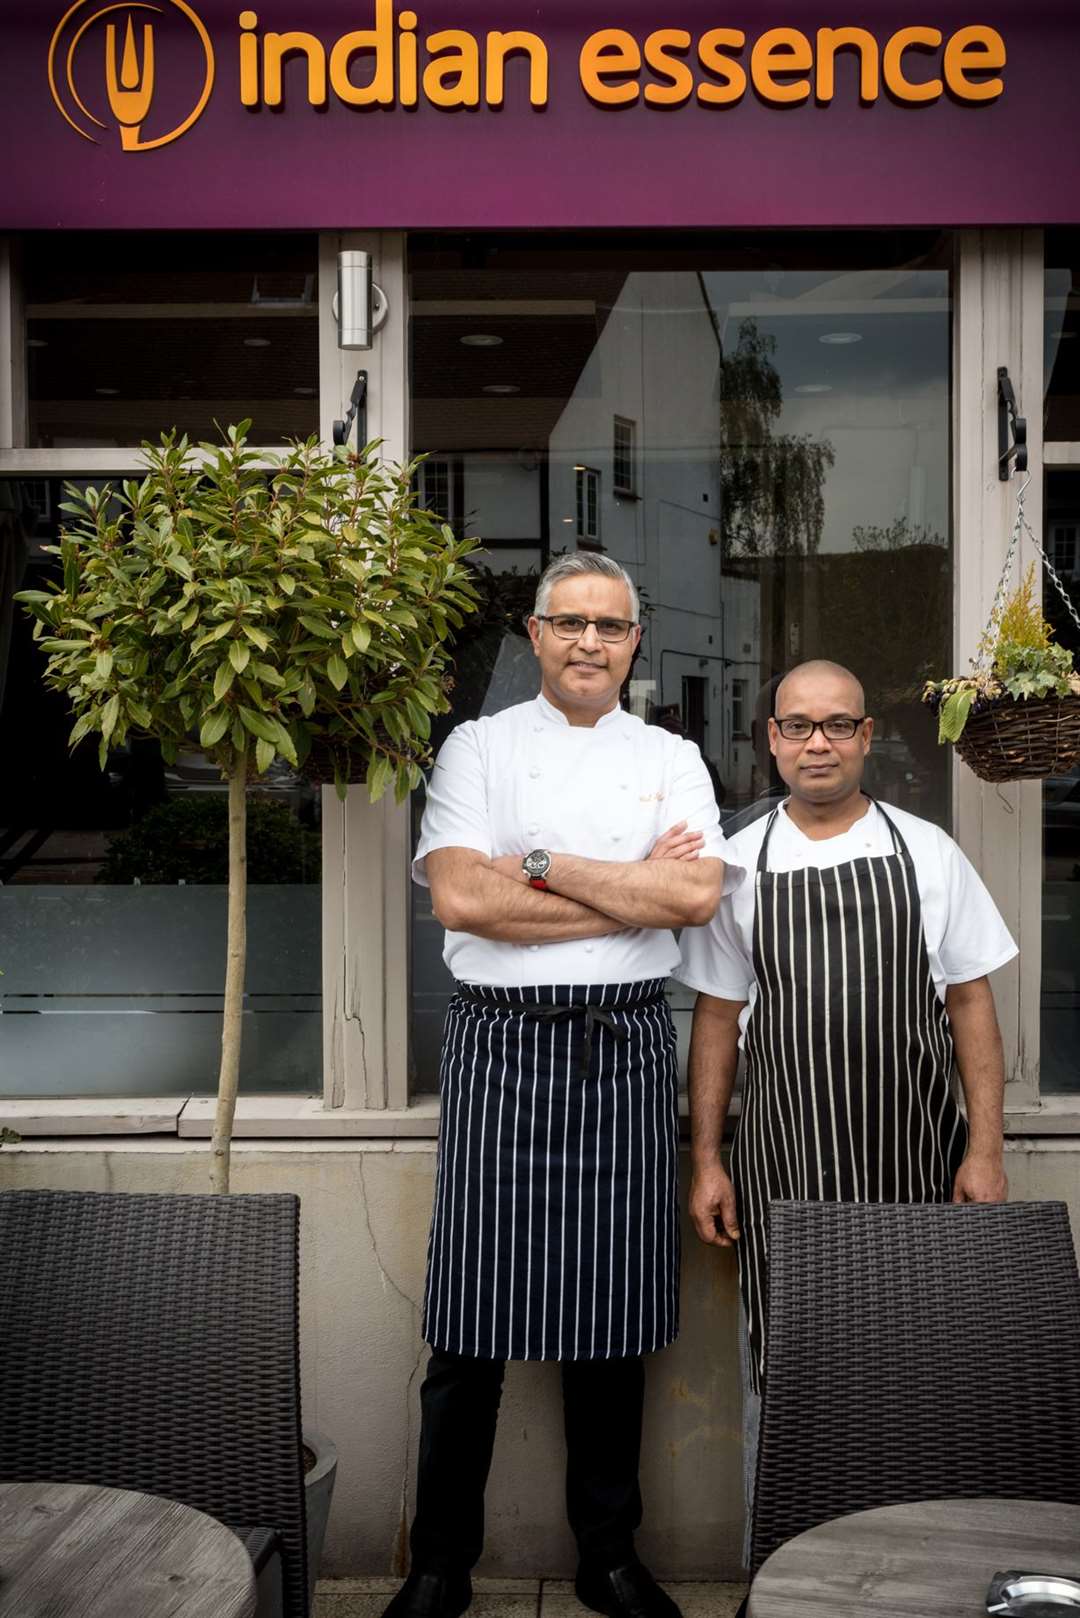 The chefs outside Indian Essence